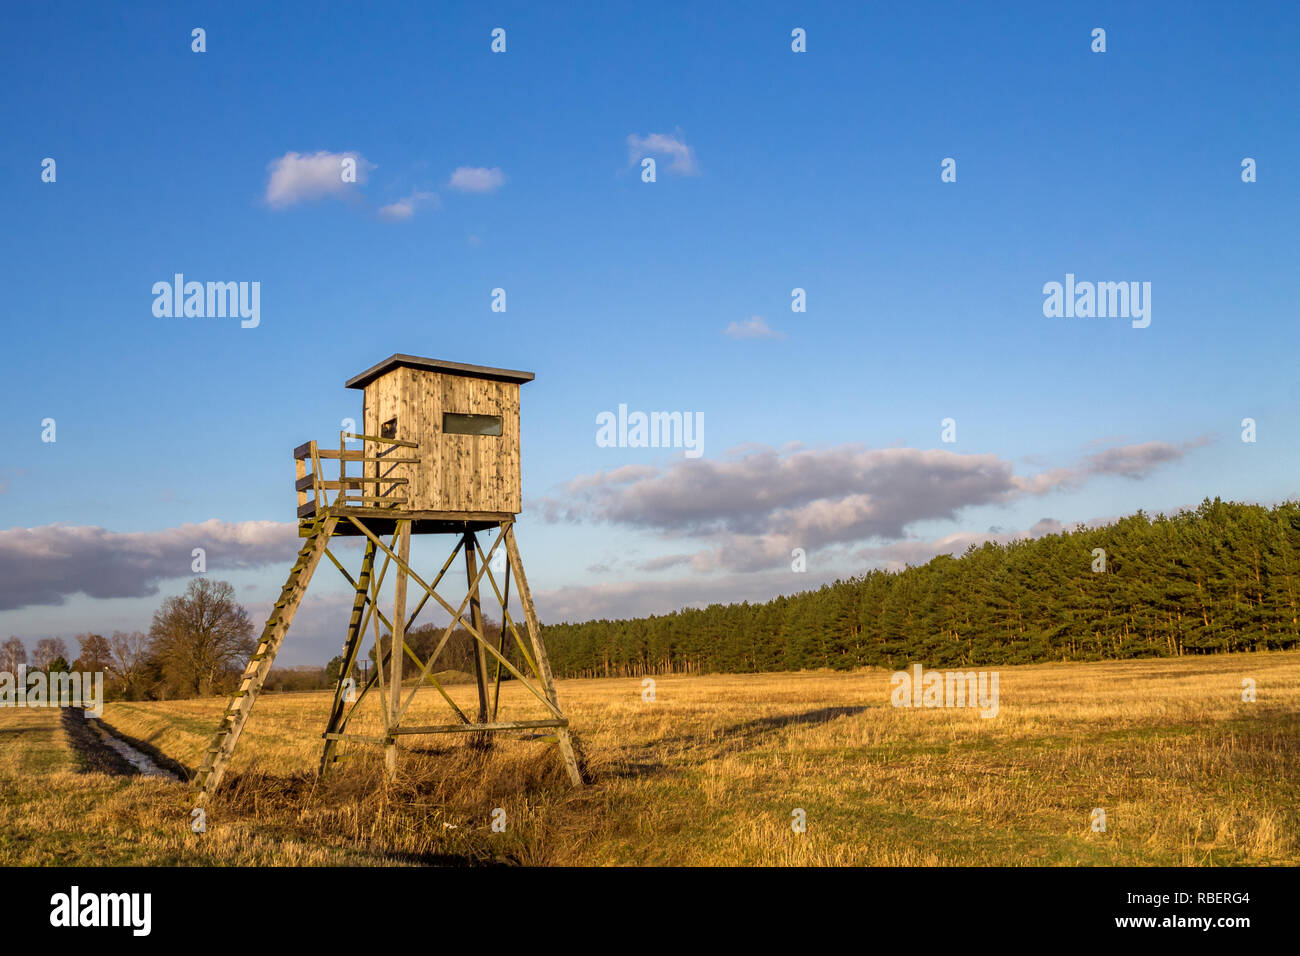 hilltop, edge of the forest, Stock Photo